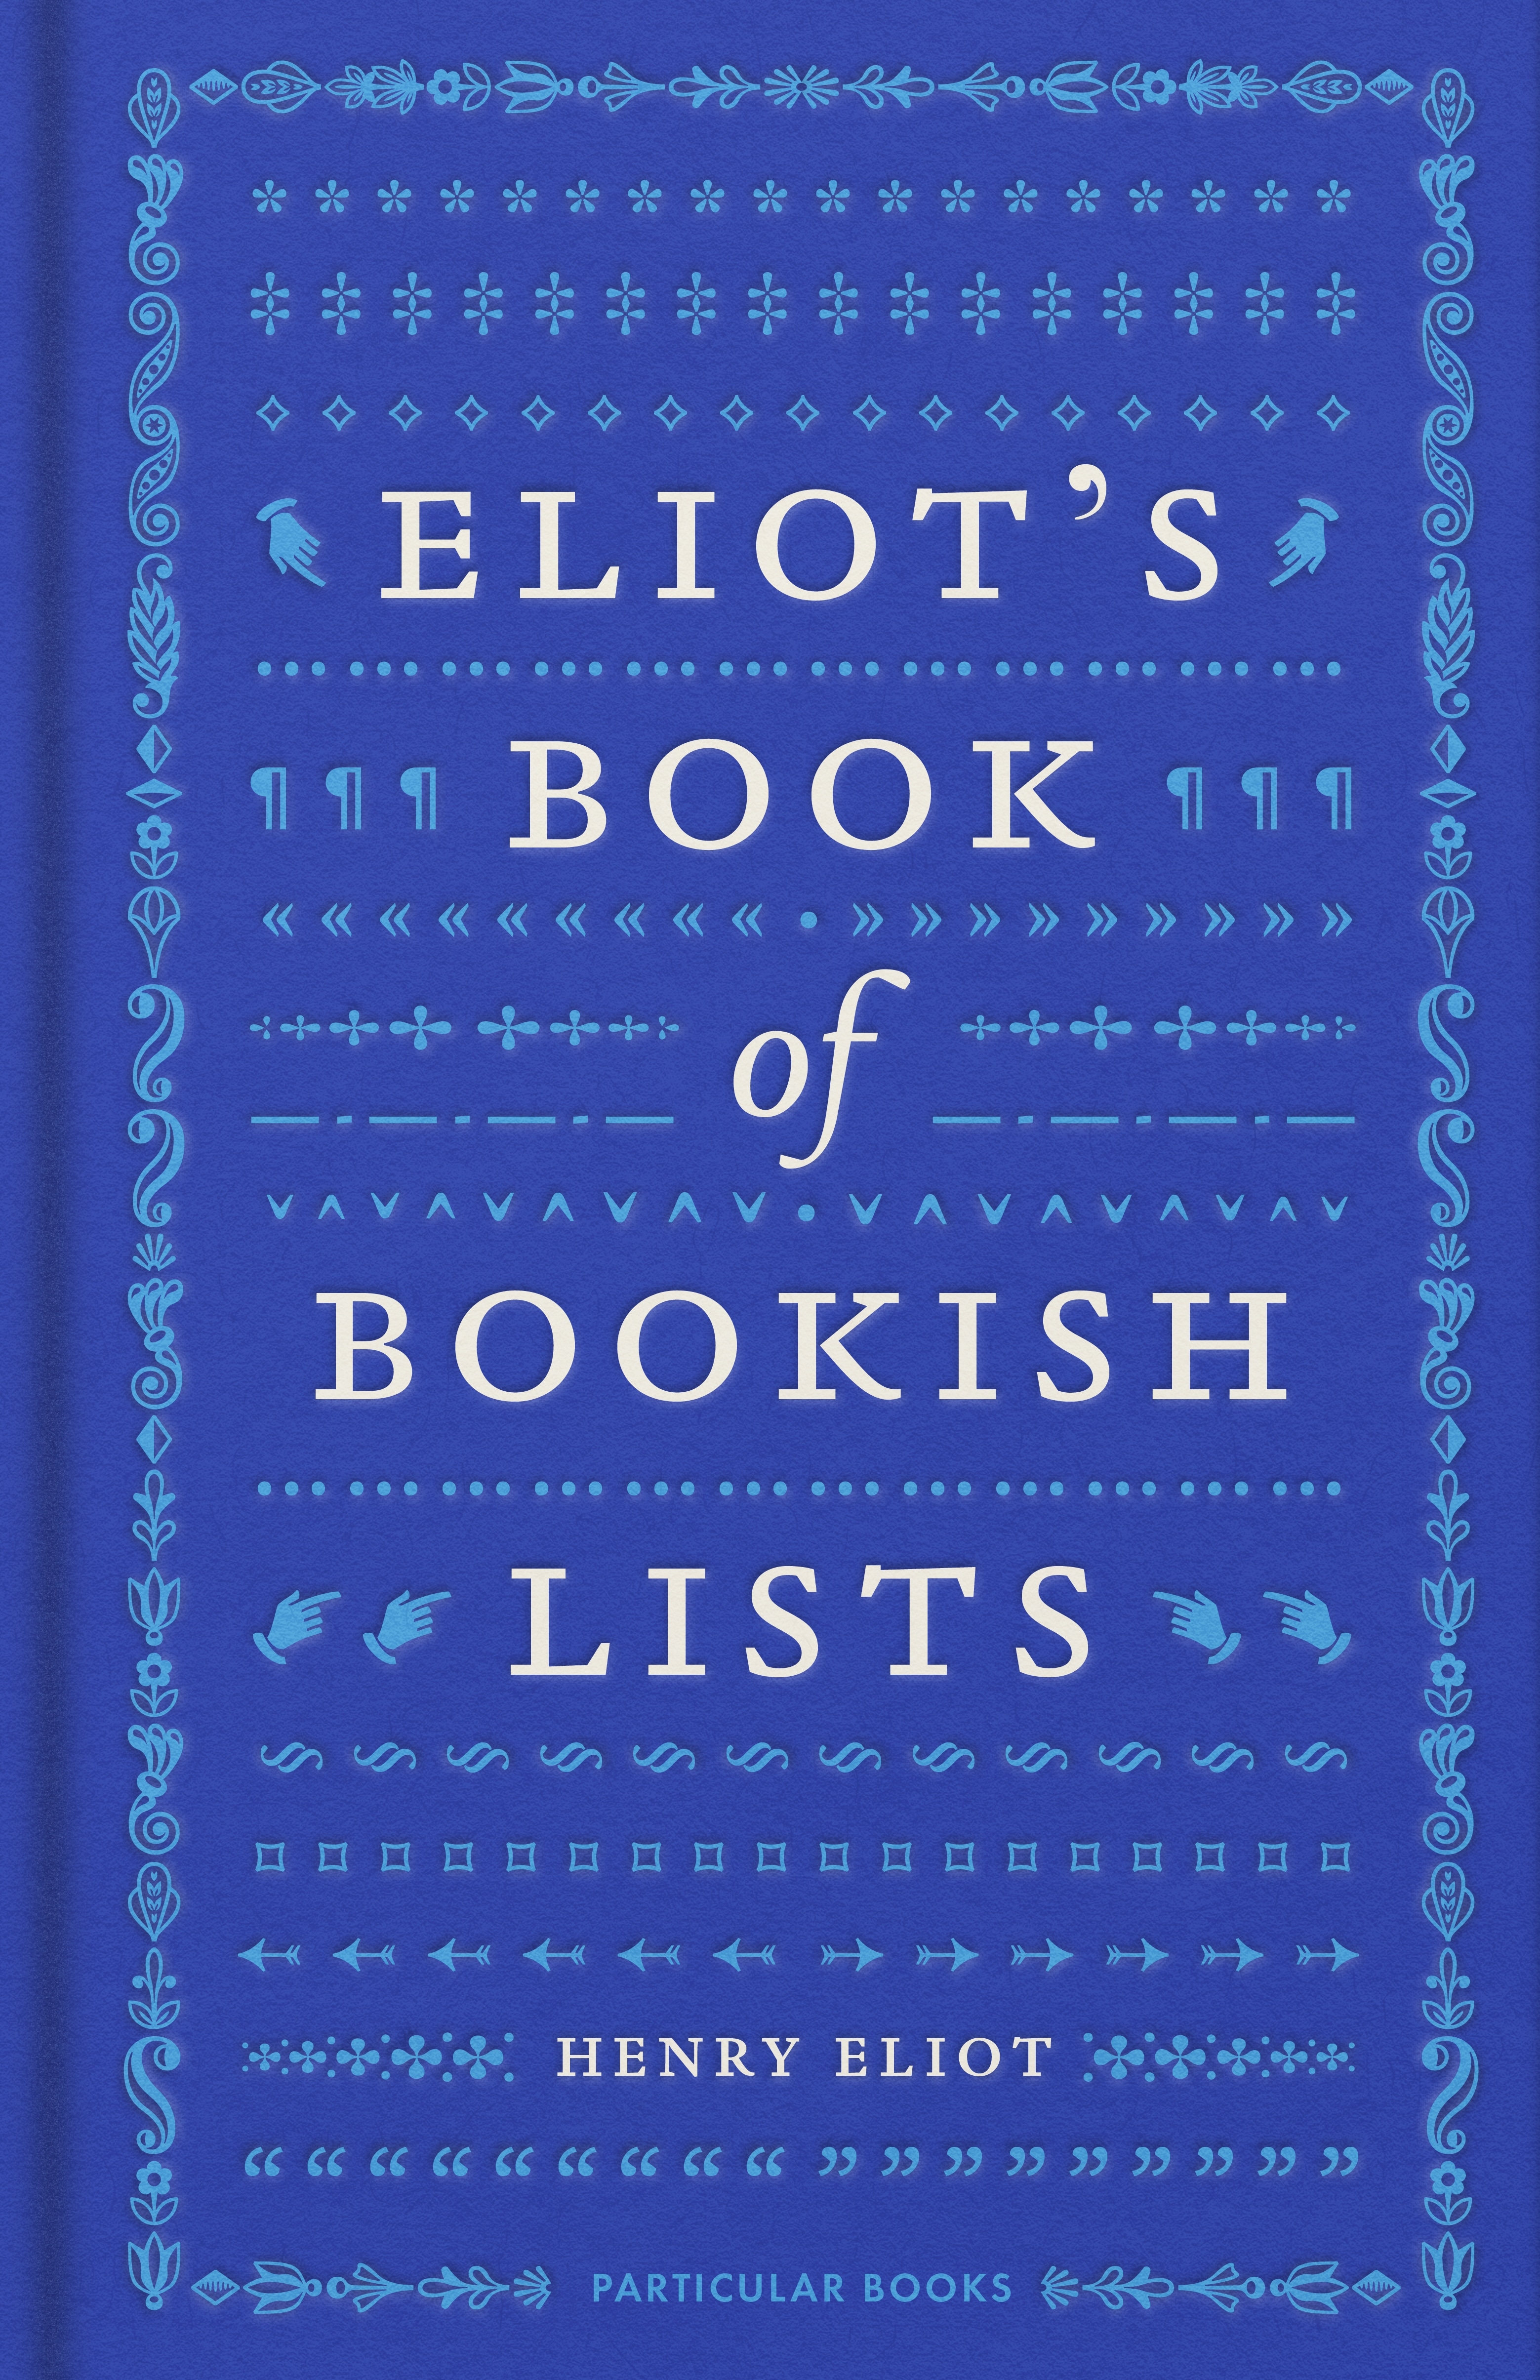 Book “Eliot's Book of Bookish Lists” by Henry Eliot — October 6, 2022